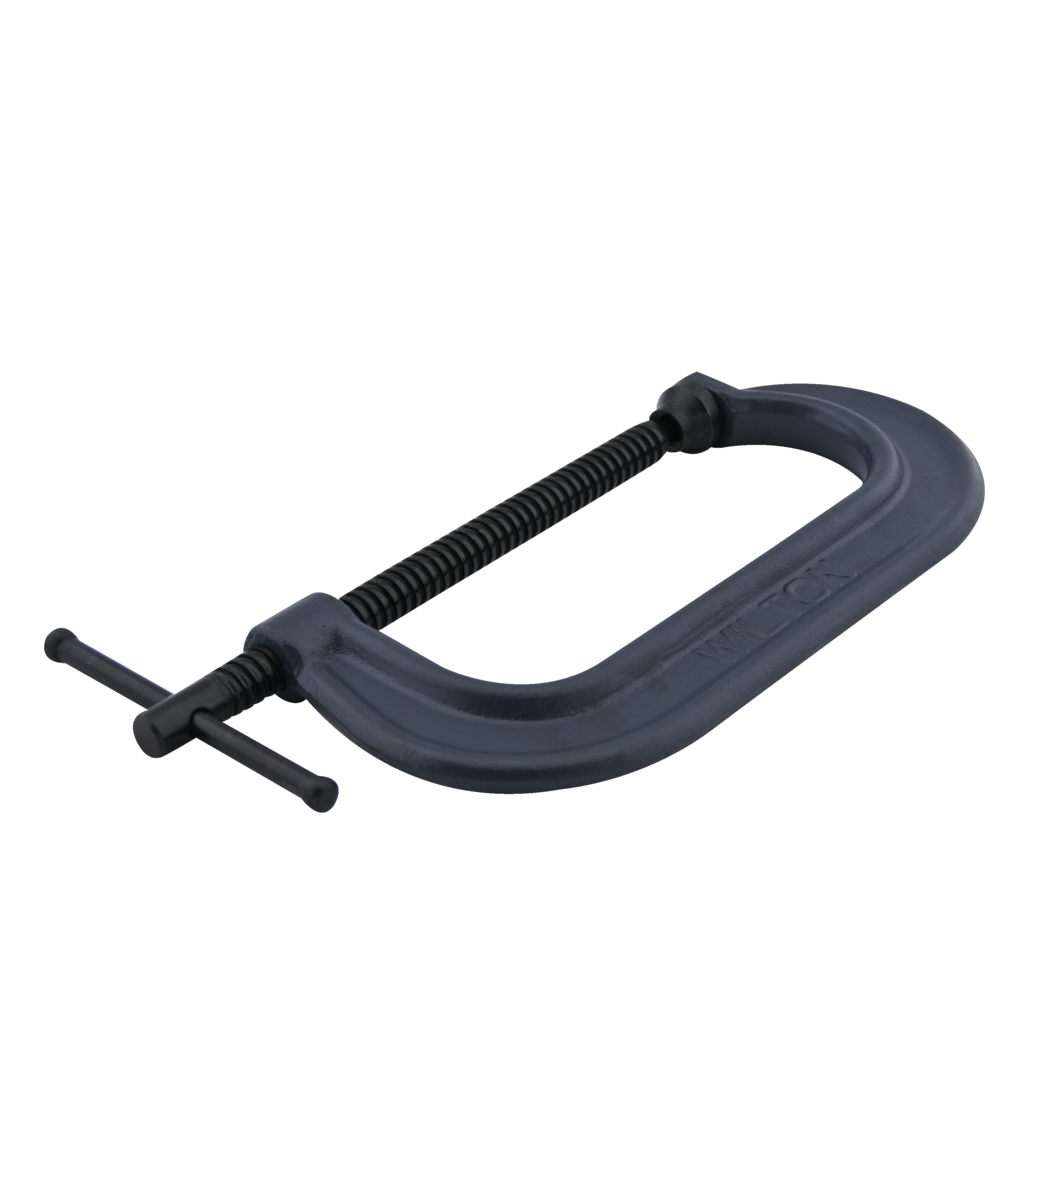 802, 800 Series Standard Depth Drop Forged C-Clamp, 0 -2” Opening, 1-13/16” Throat